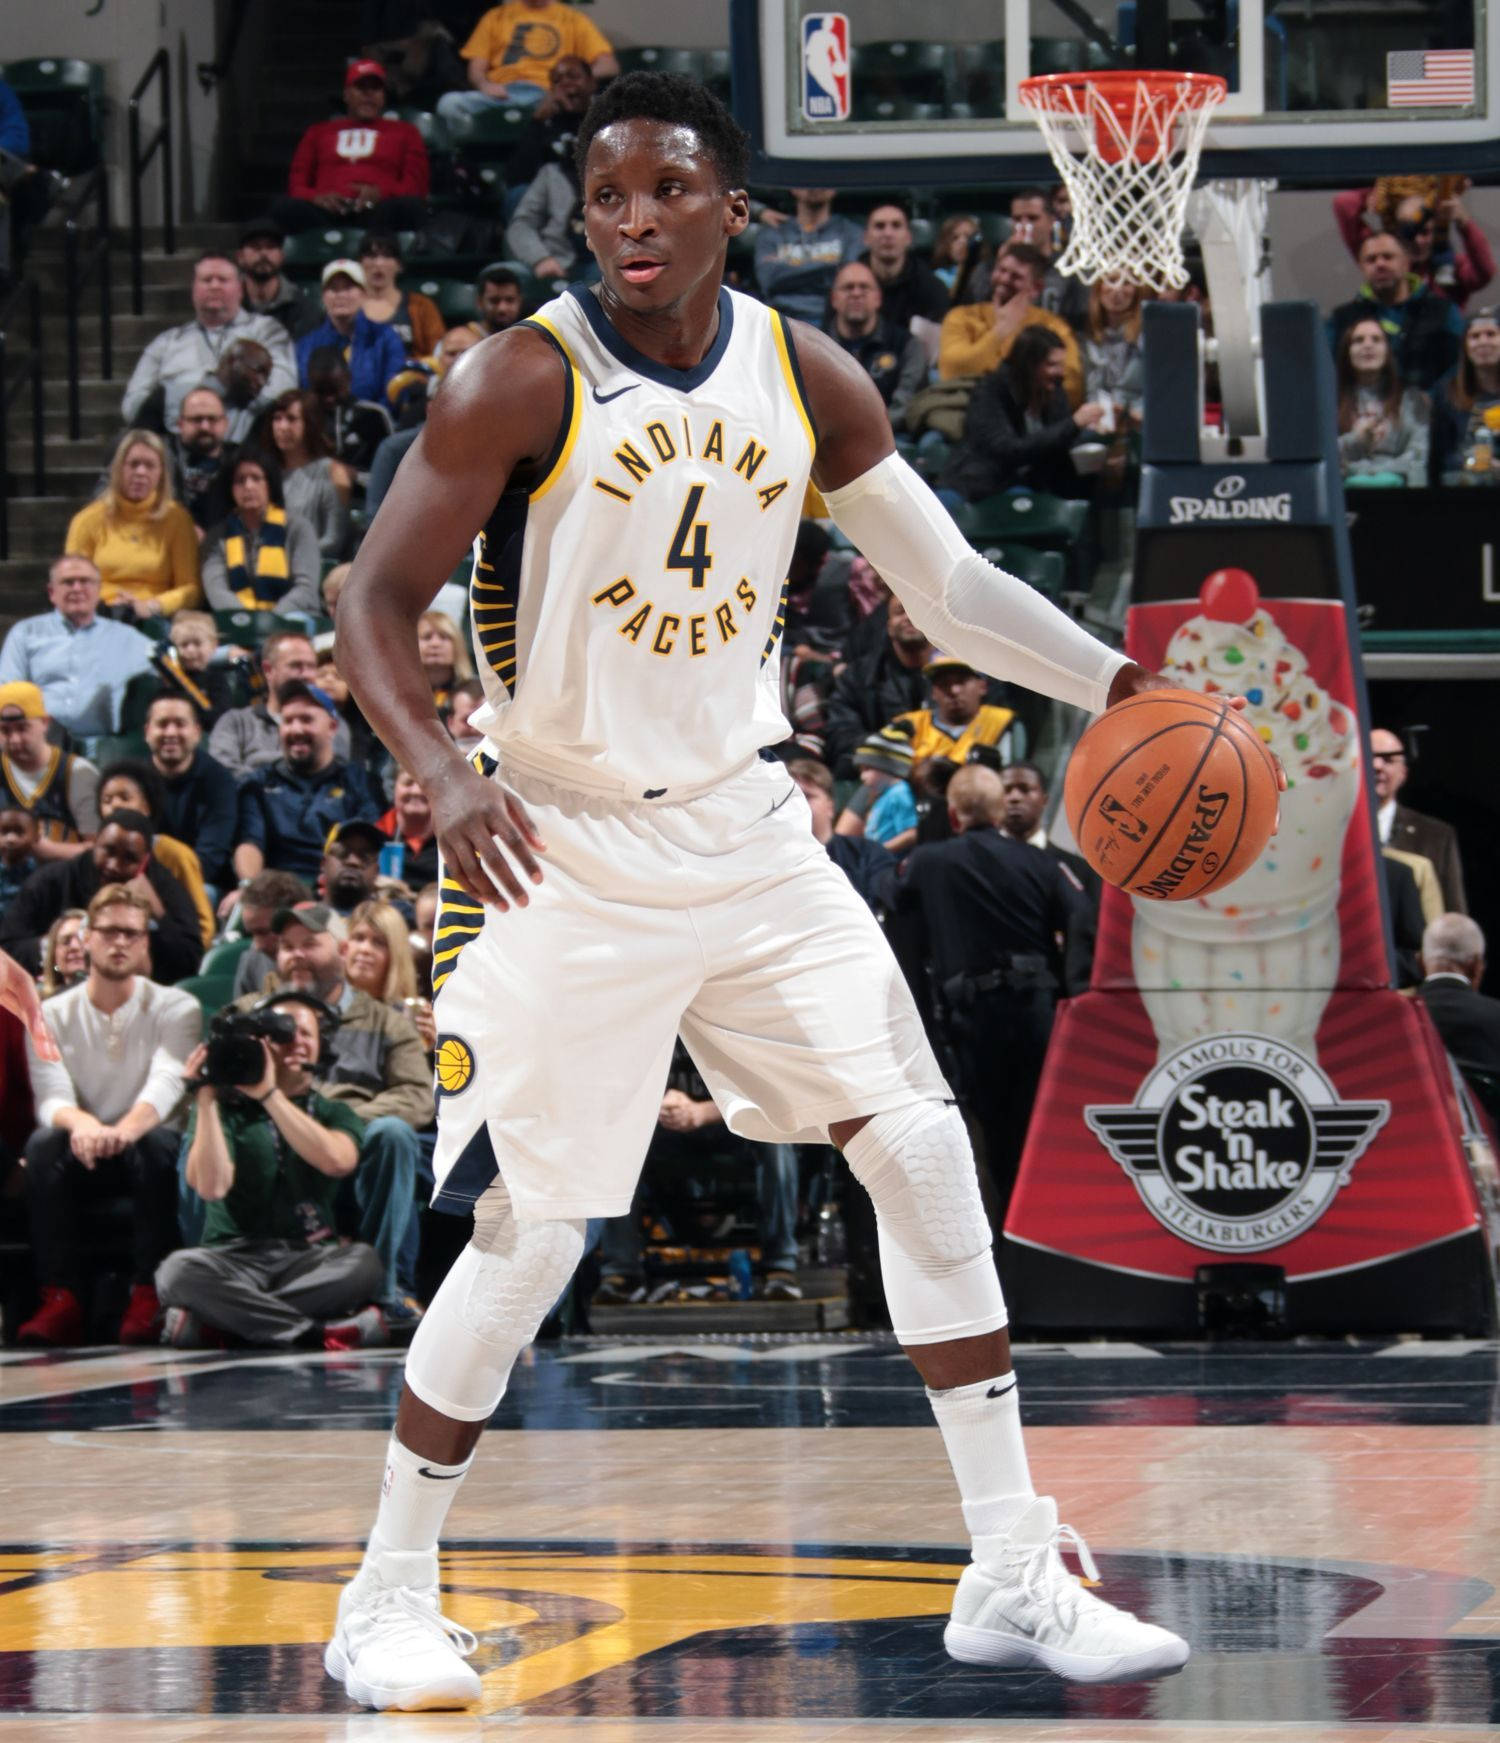 Victor Oladipo In All-white Outfit Background